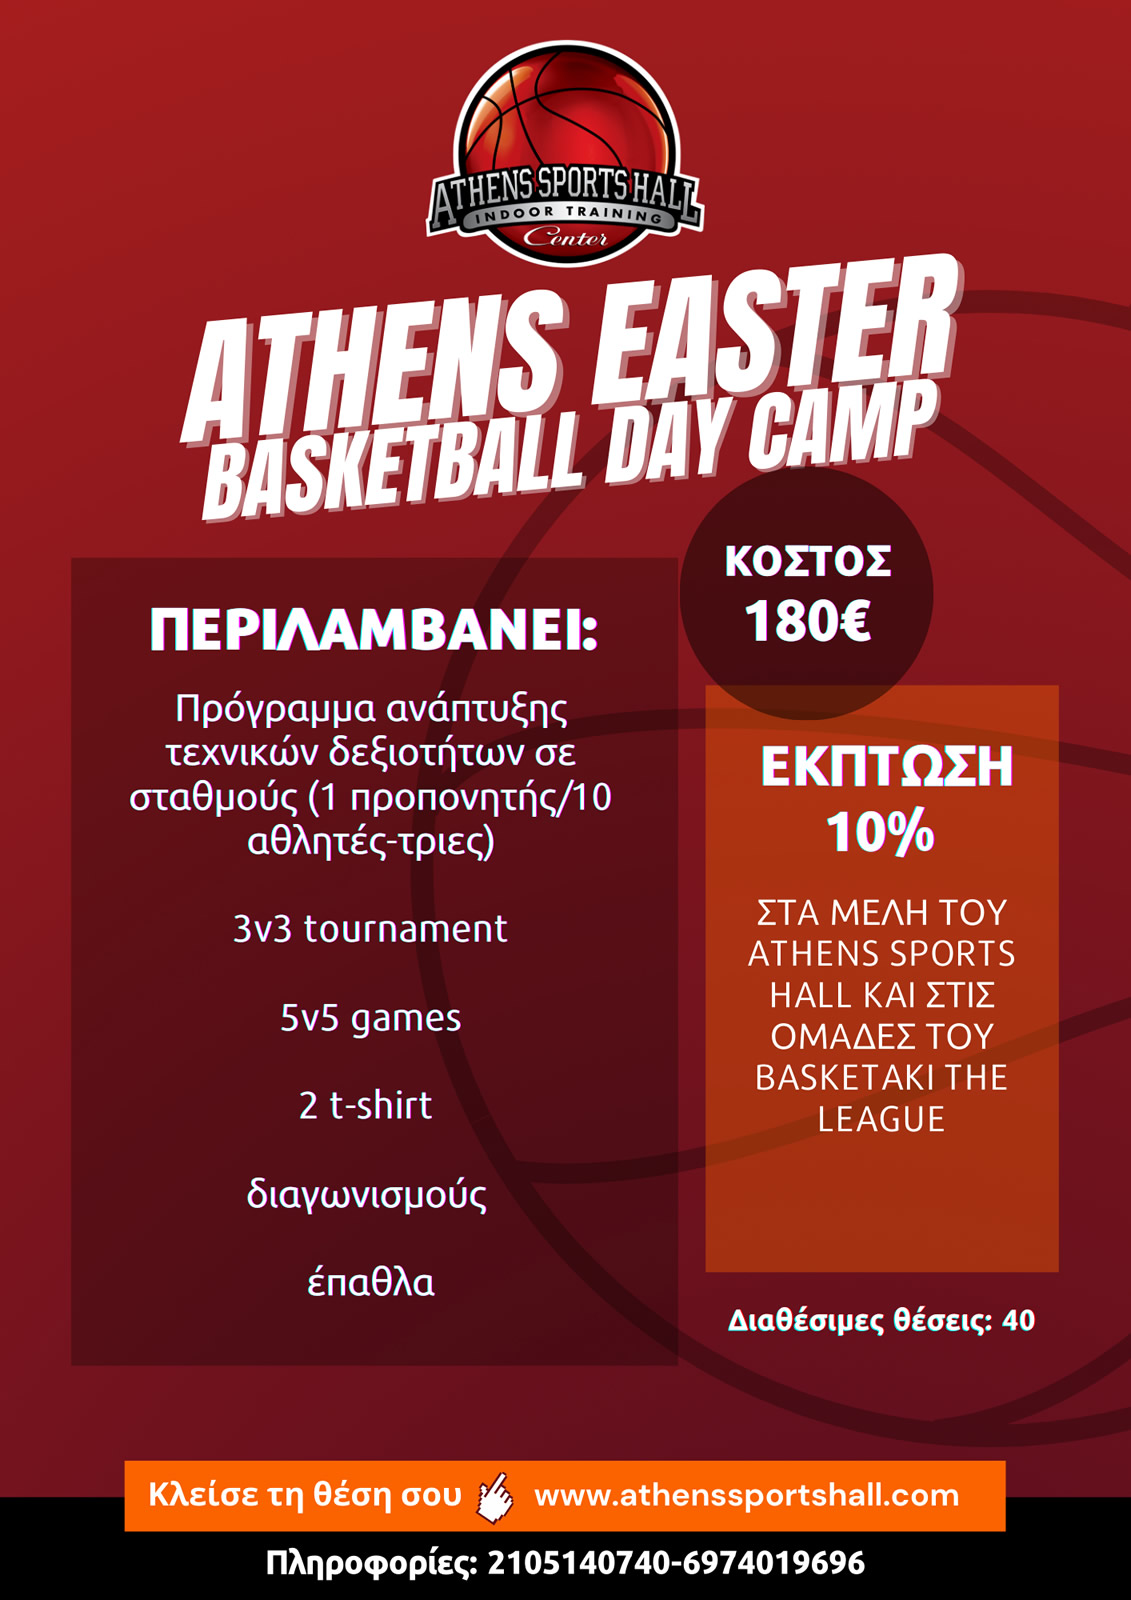 ATHENS_EASTER_BASKETBALL_DAY_CAMP